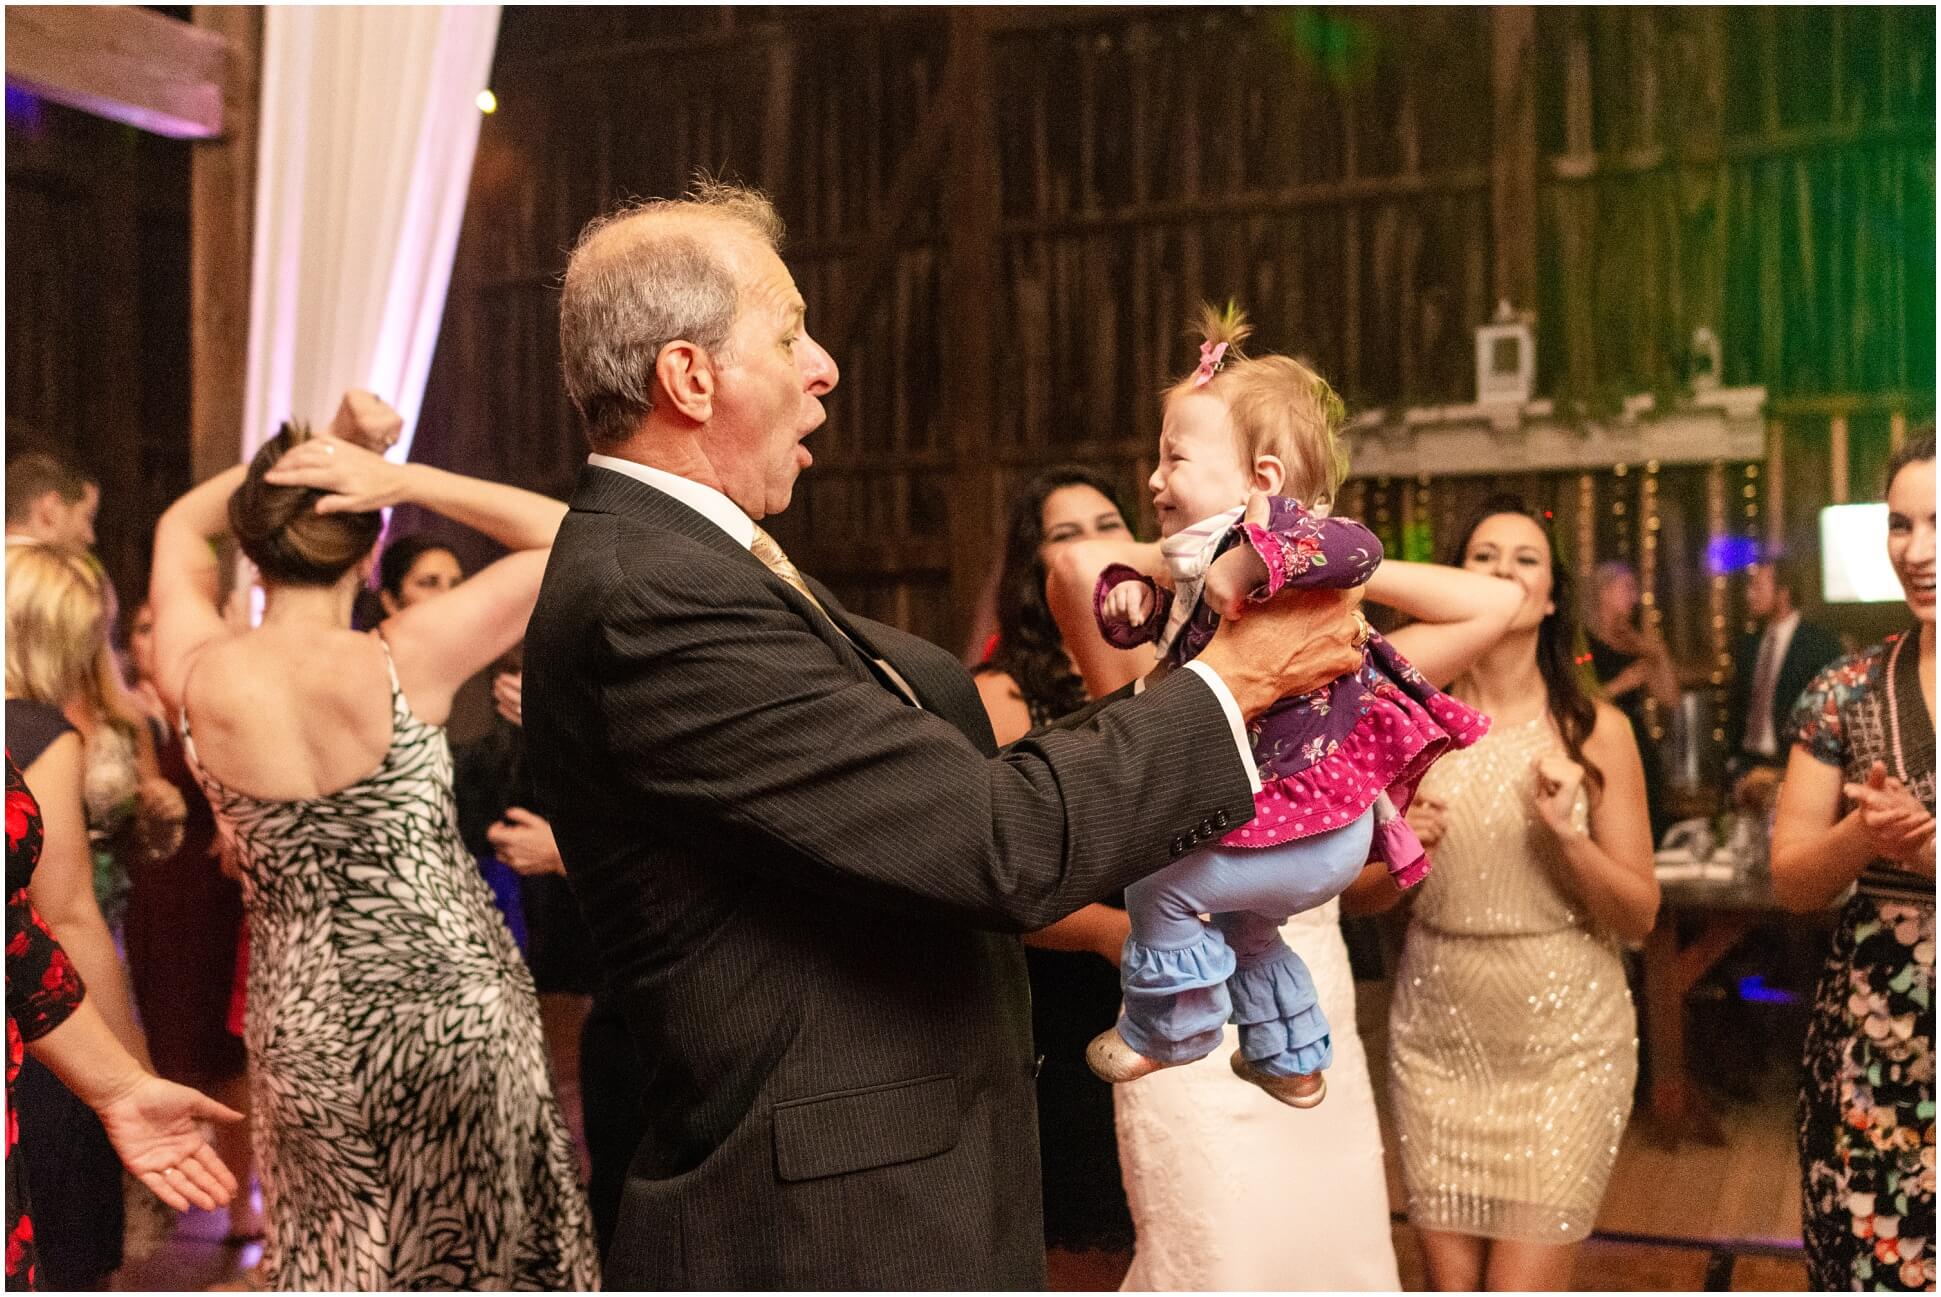 FATHER OF THE BRIDE DANCING WITH A CRING BABY